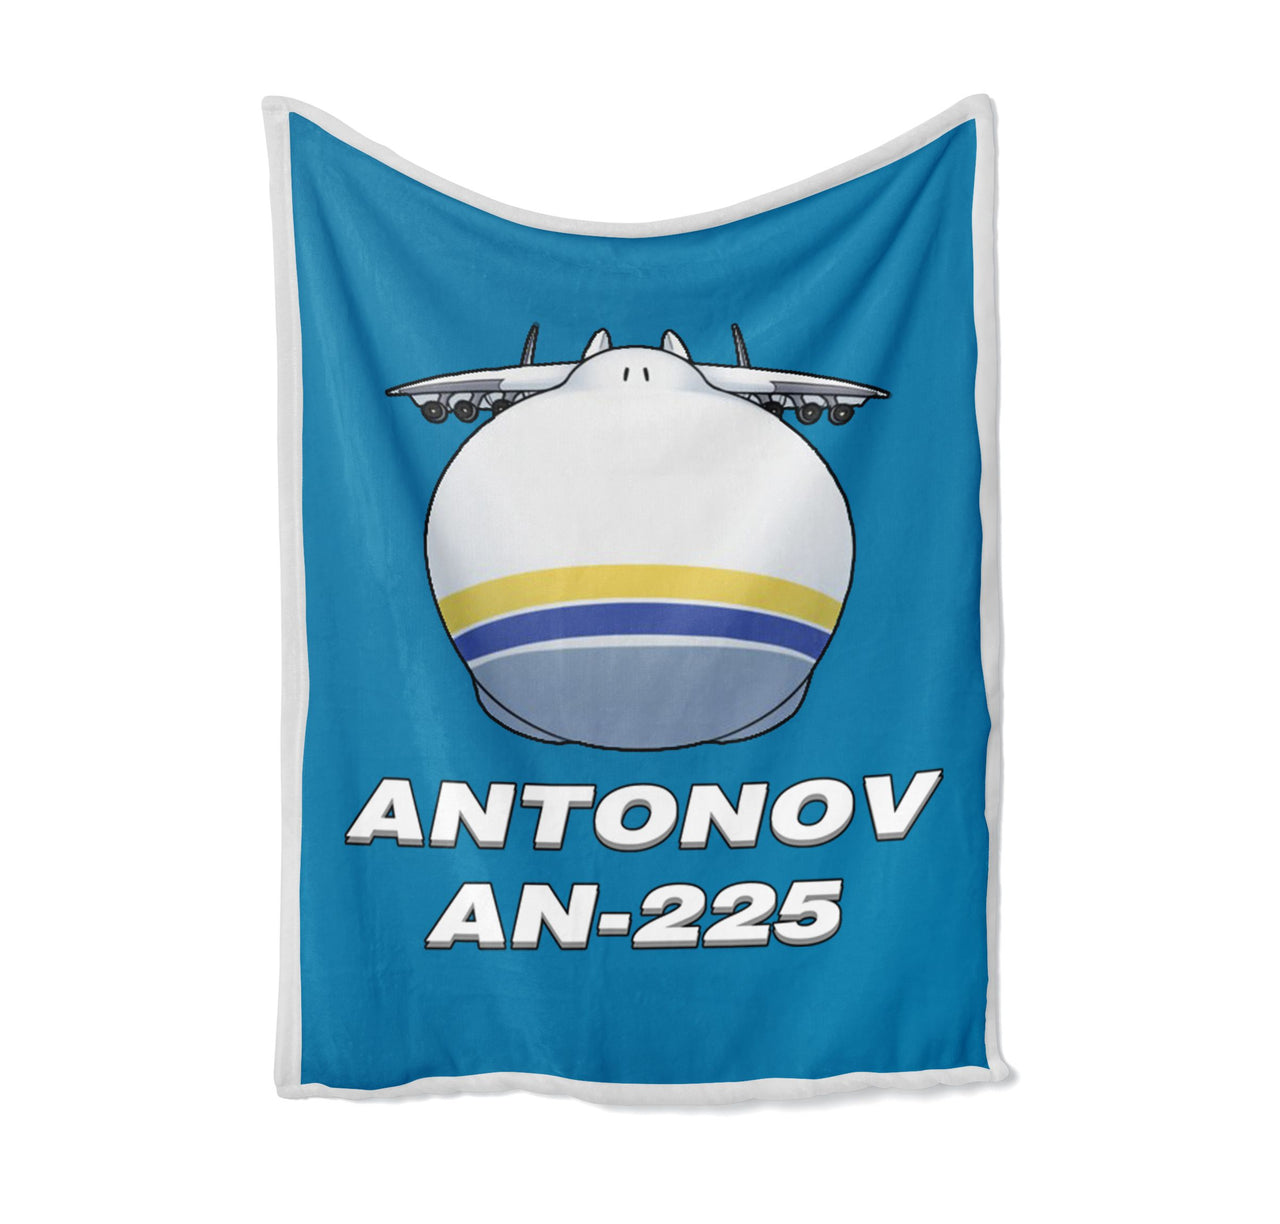 Antonov AN-225 (20) Designed Bed Blankets & Covers